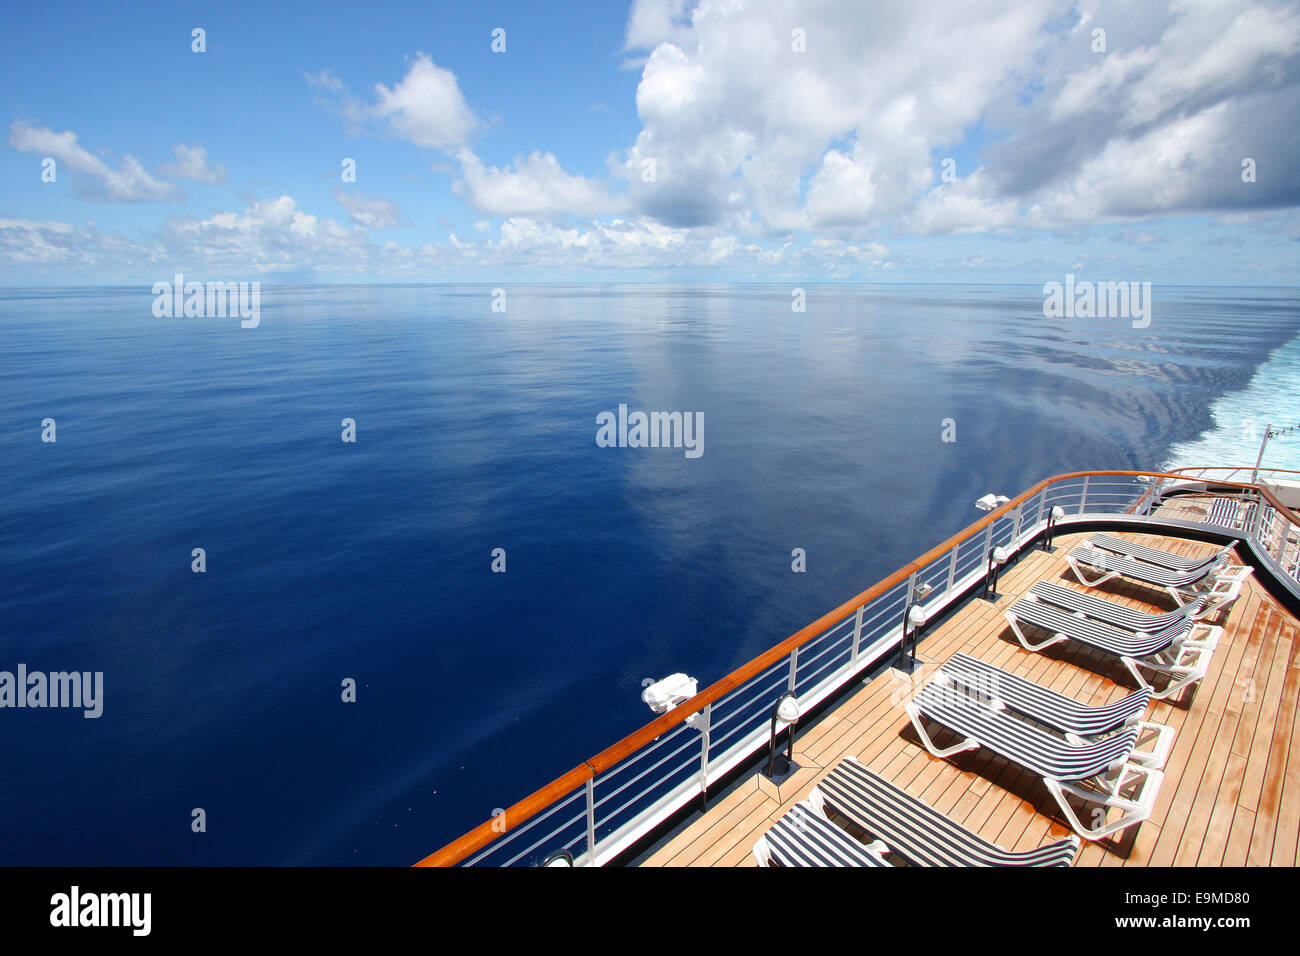 Cruise ship sails across a beautiful calm ocean. Deck chairs are laid out ready for relaxation, Indian Ocean. Stock Photo